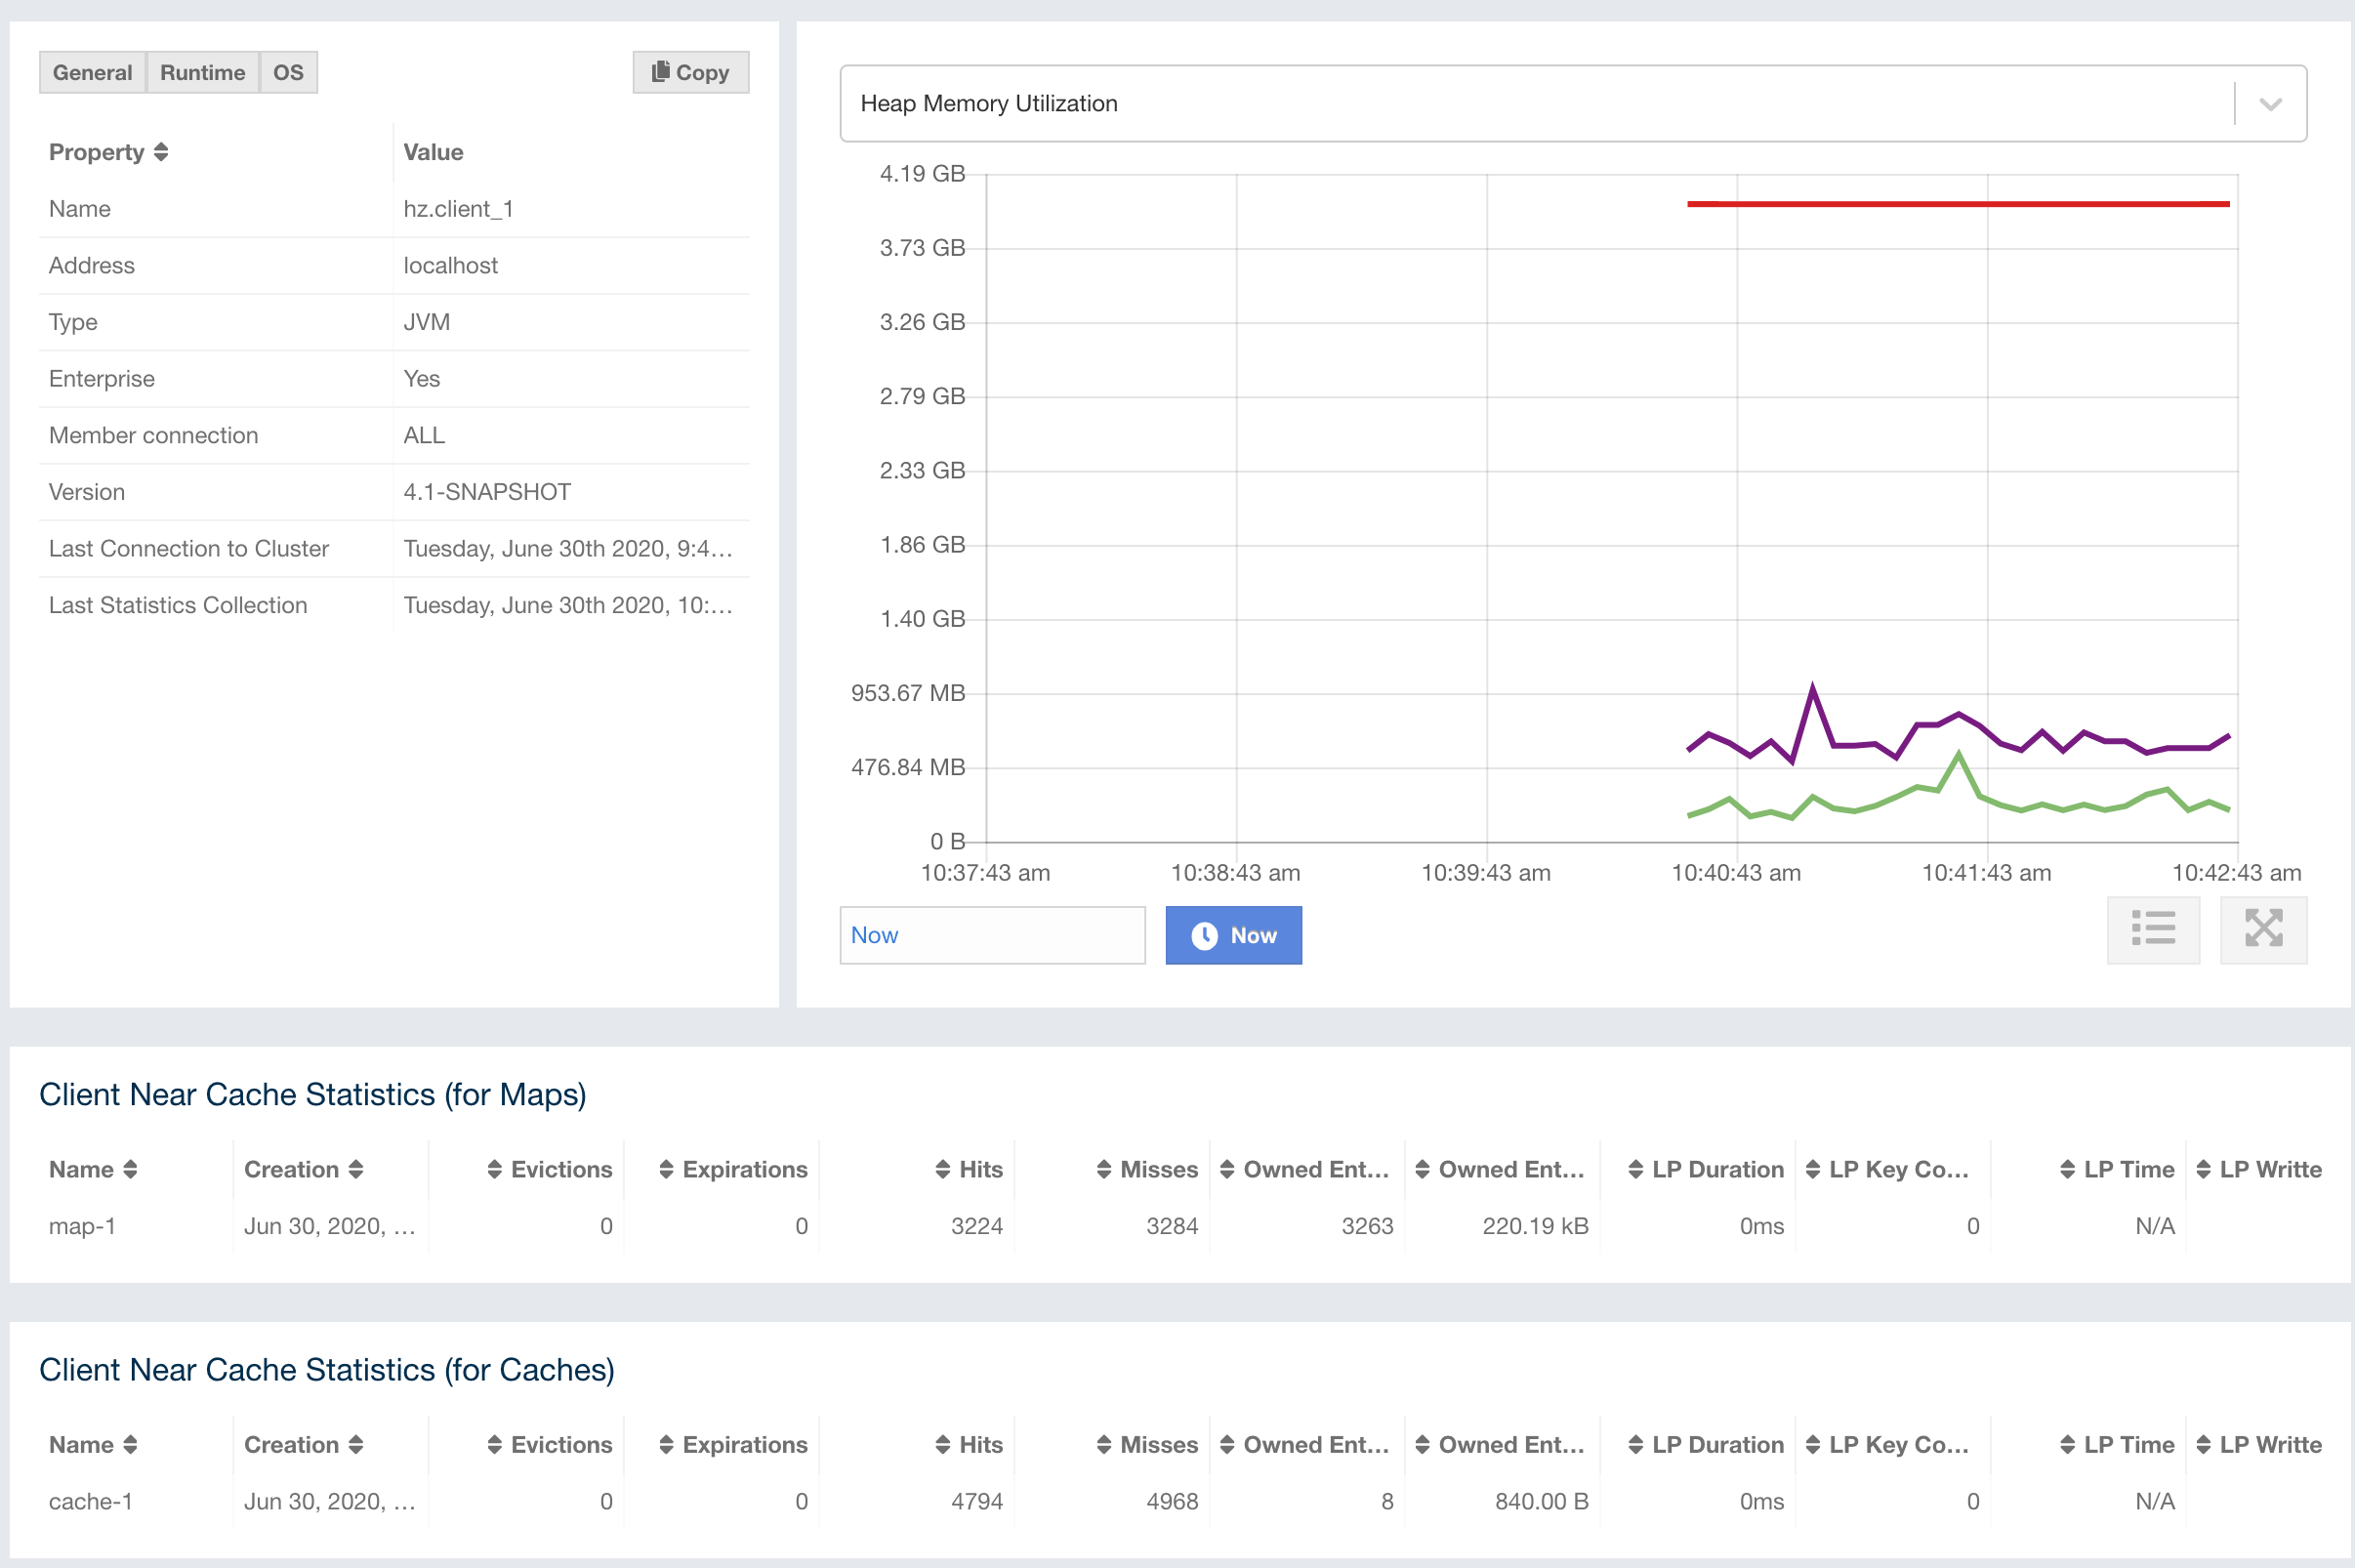 Monitoring Client Detailed